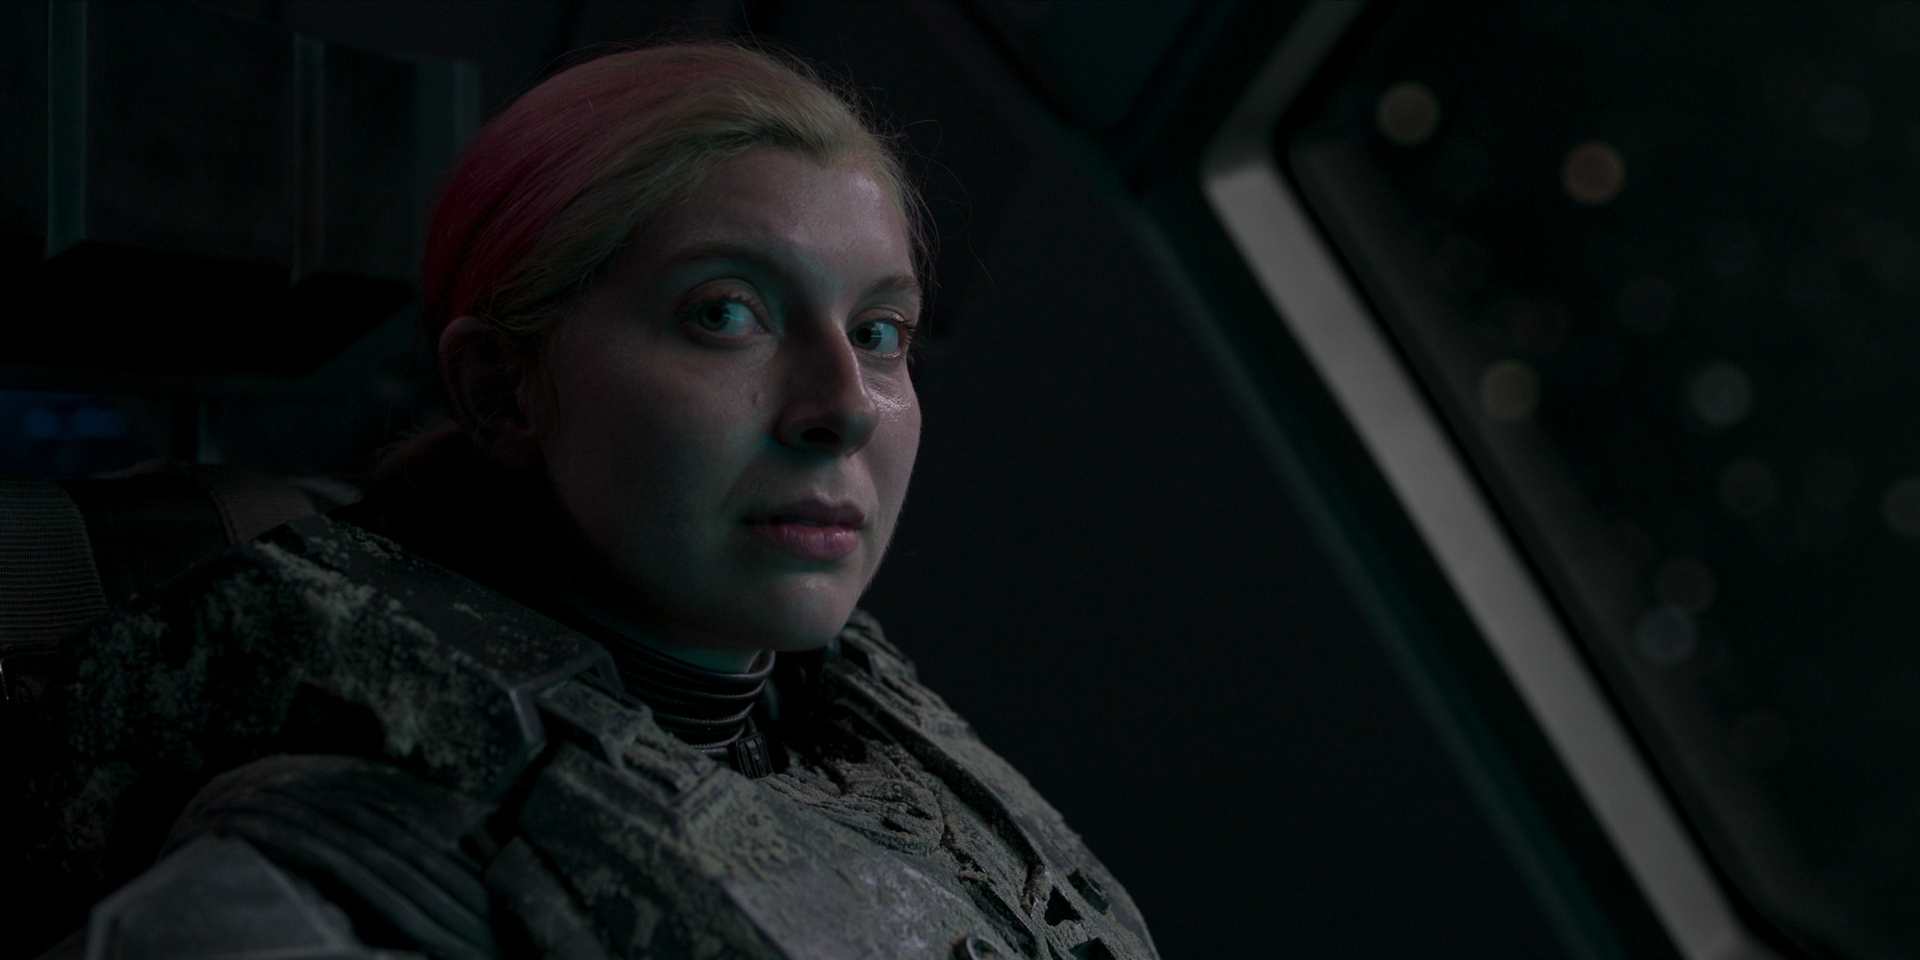 Kai, a white woman with blonde-and-pink hair in a ponytail, sits in a seat looking sideways.